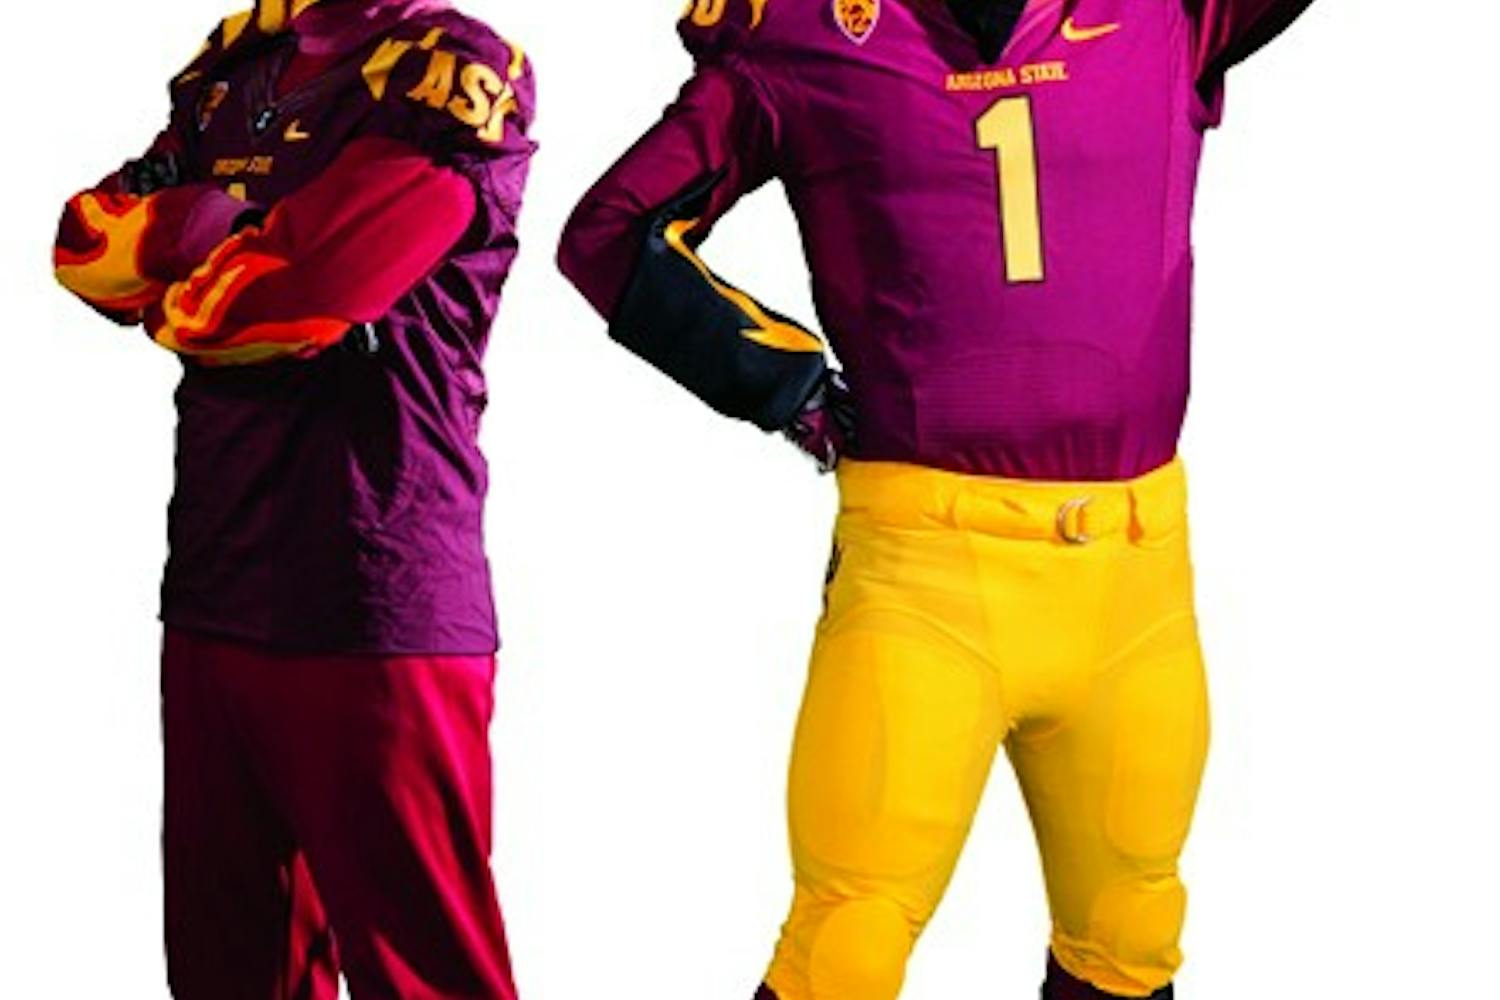 The old Sparky costume, on the left, featured sweatpants and flames. The newer design, on the right, was designed in collaboration with Disney. Alumni and student reactions to the new mascot have been mixed. (Photo Courtesy of ASU Media Relations)